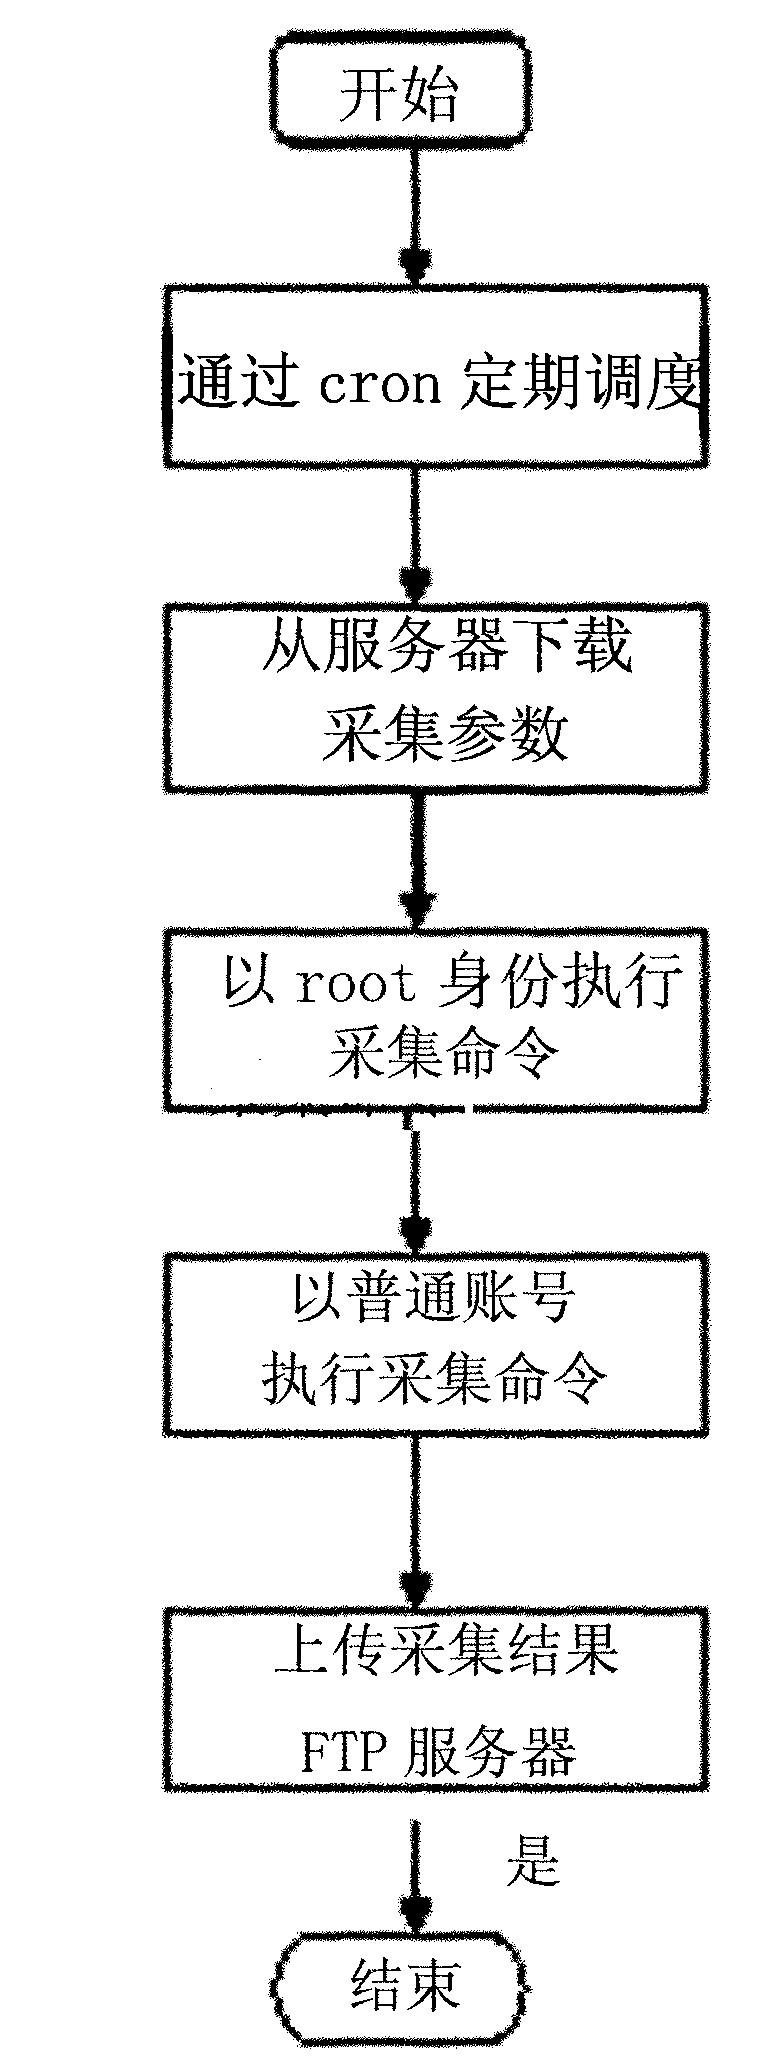 Method and device for collecting Unix/Linux system operation data